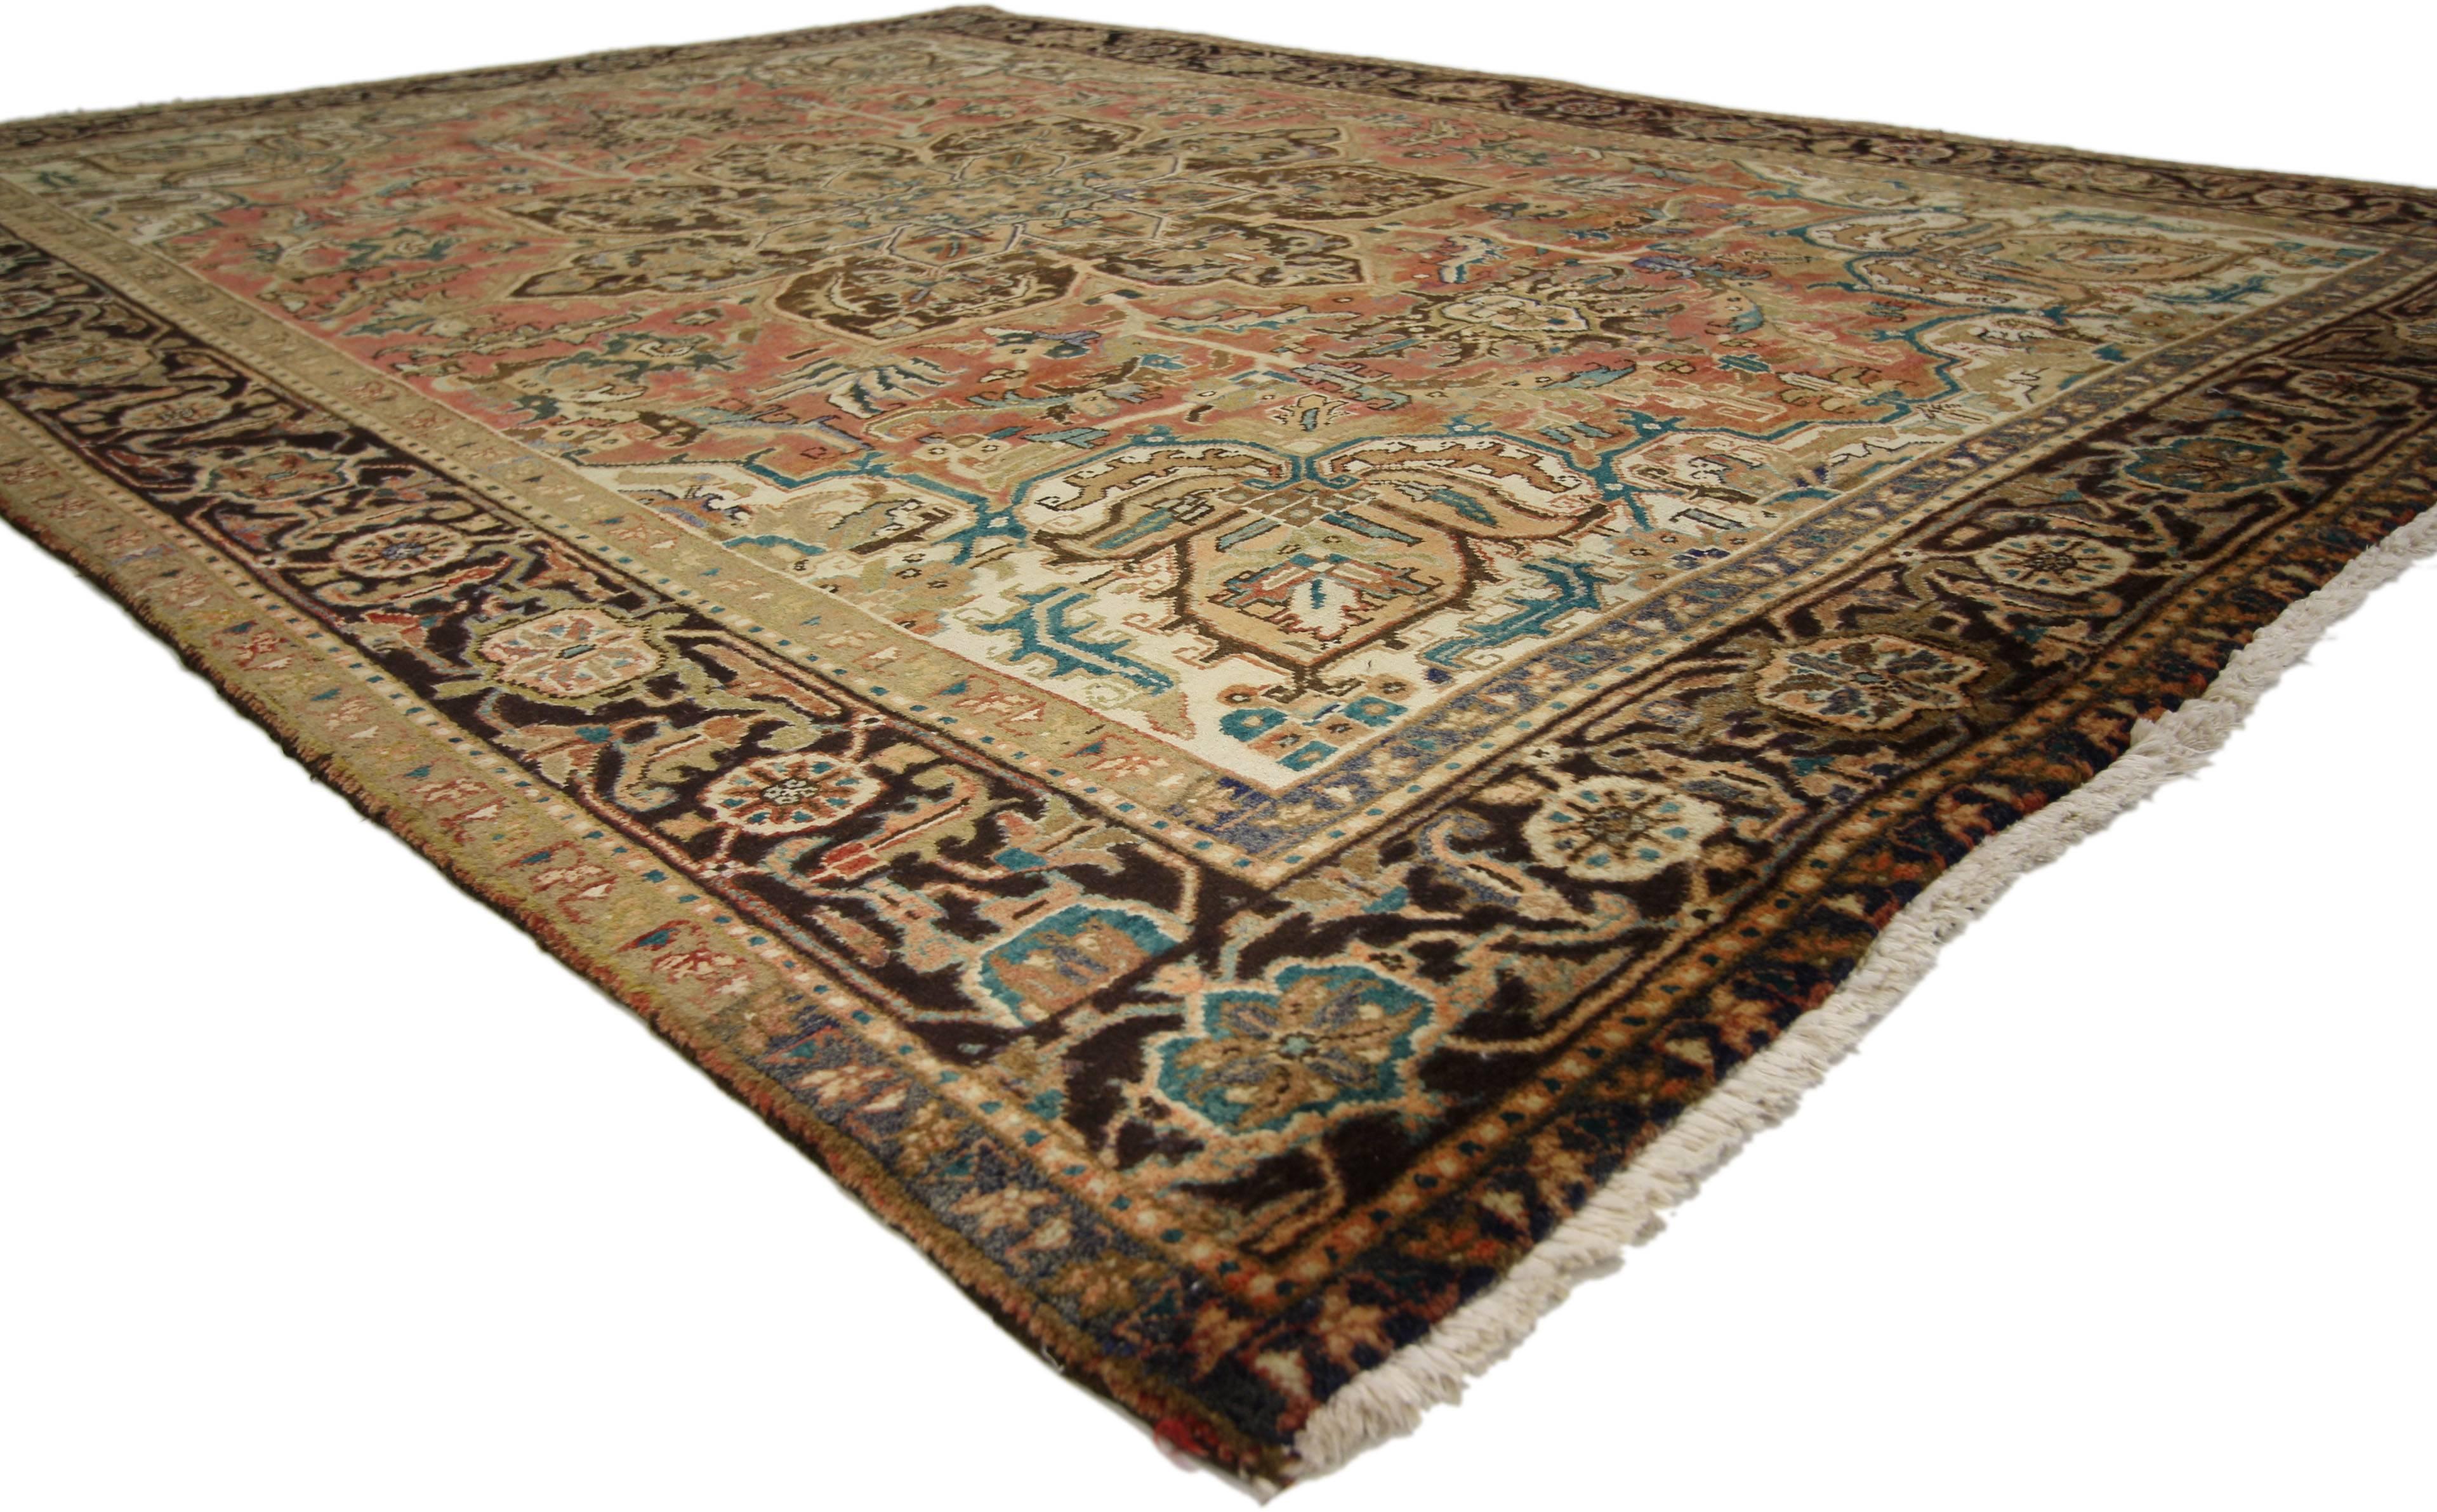 75554, Traditional Vintage Persian Heriz Rug with Colonial Revival Style 07'00 x 09'10. This hand knotted wool antique-washed vintage Persian Heriz rug features a large concentric octofoil medallion with serrated palmette pendants floating in the